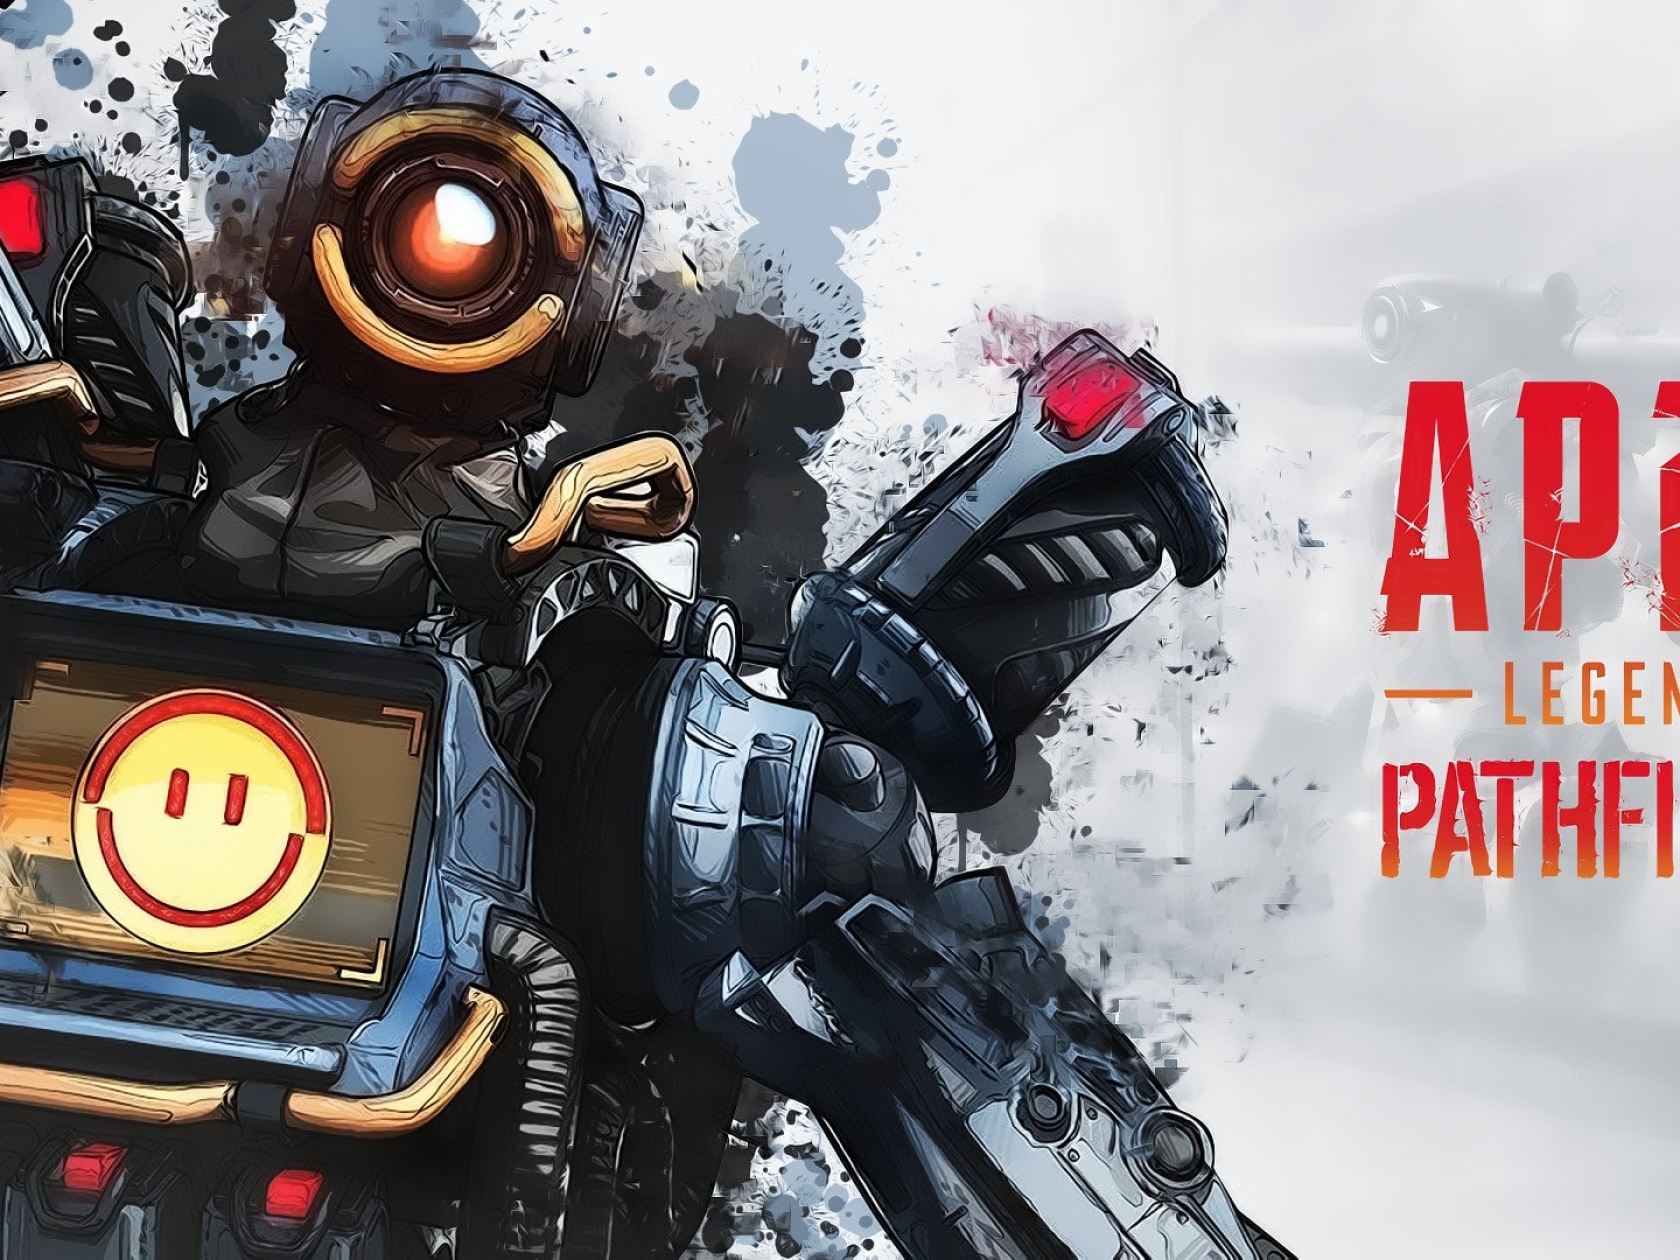 Featured image of post Pathfinder Apex Legends Wallpaper Iphone If you re one of the apex legends fans show your support for the game using one of our high definition desktop or mobile wallpapers